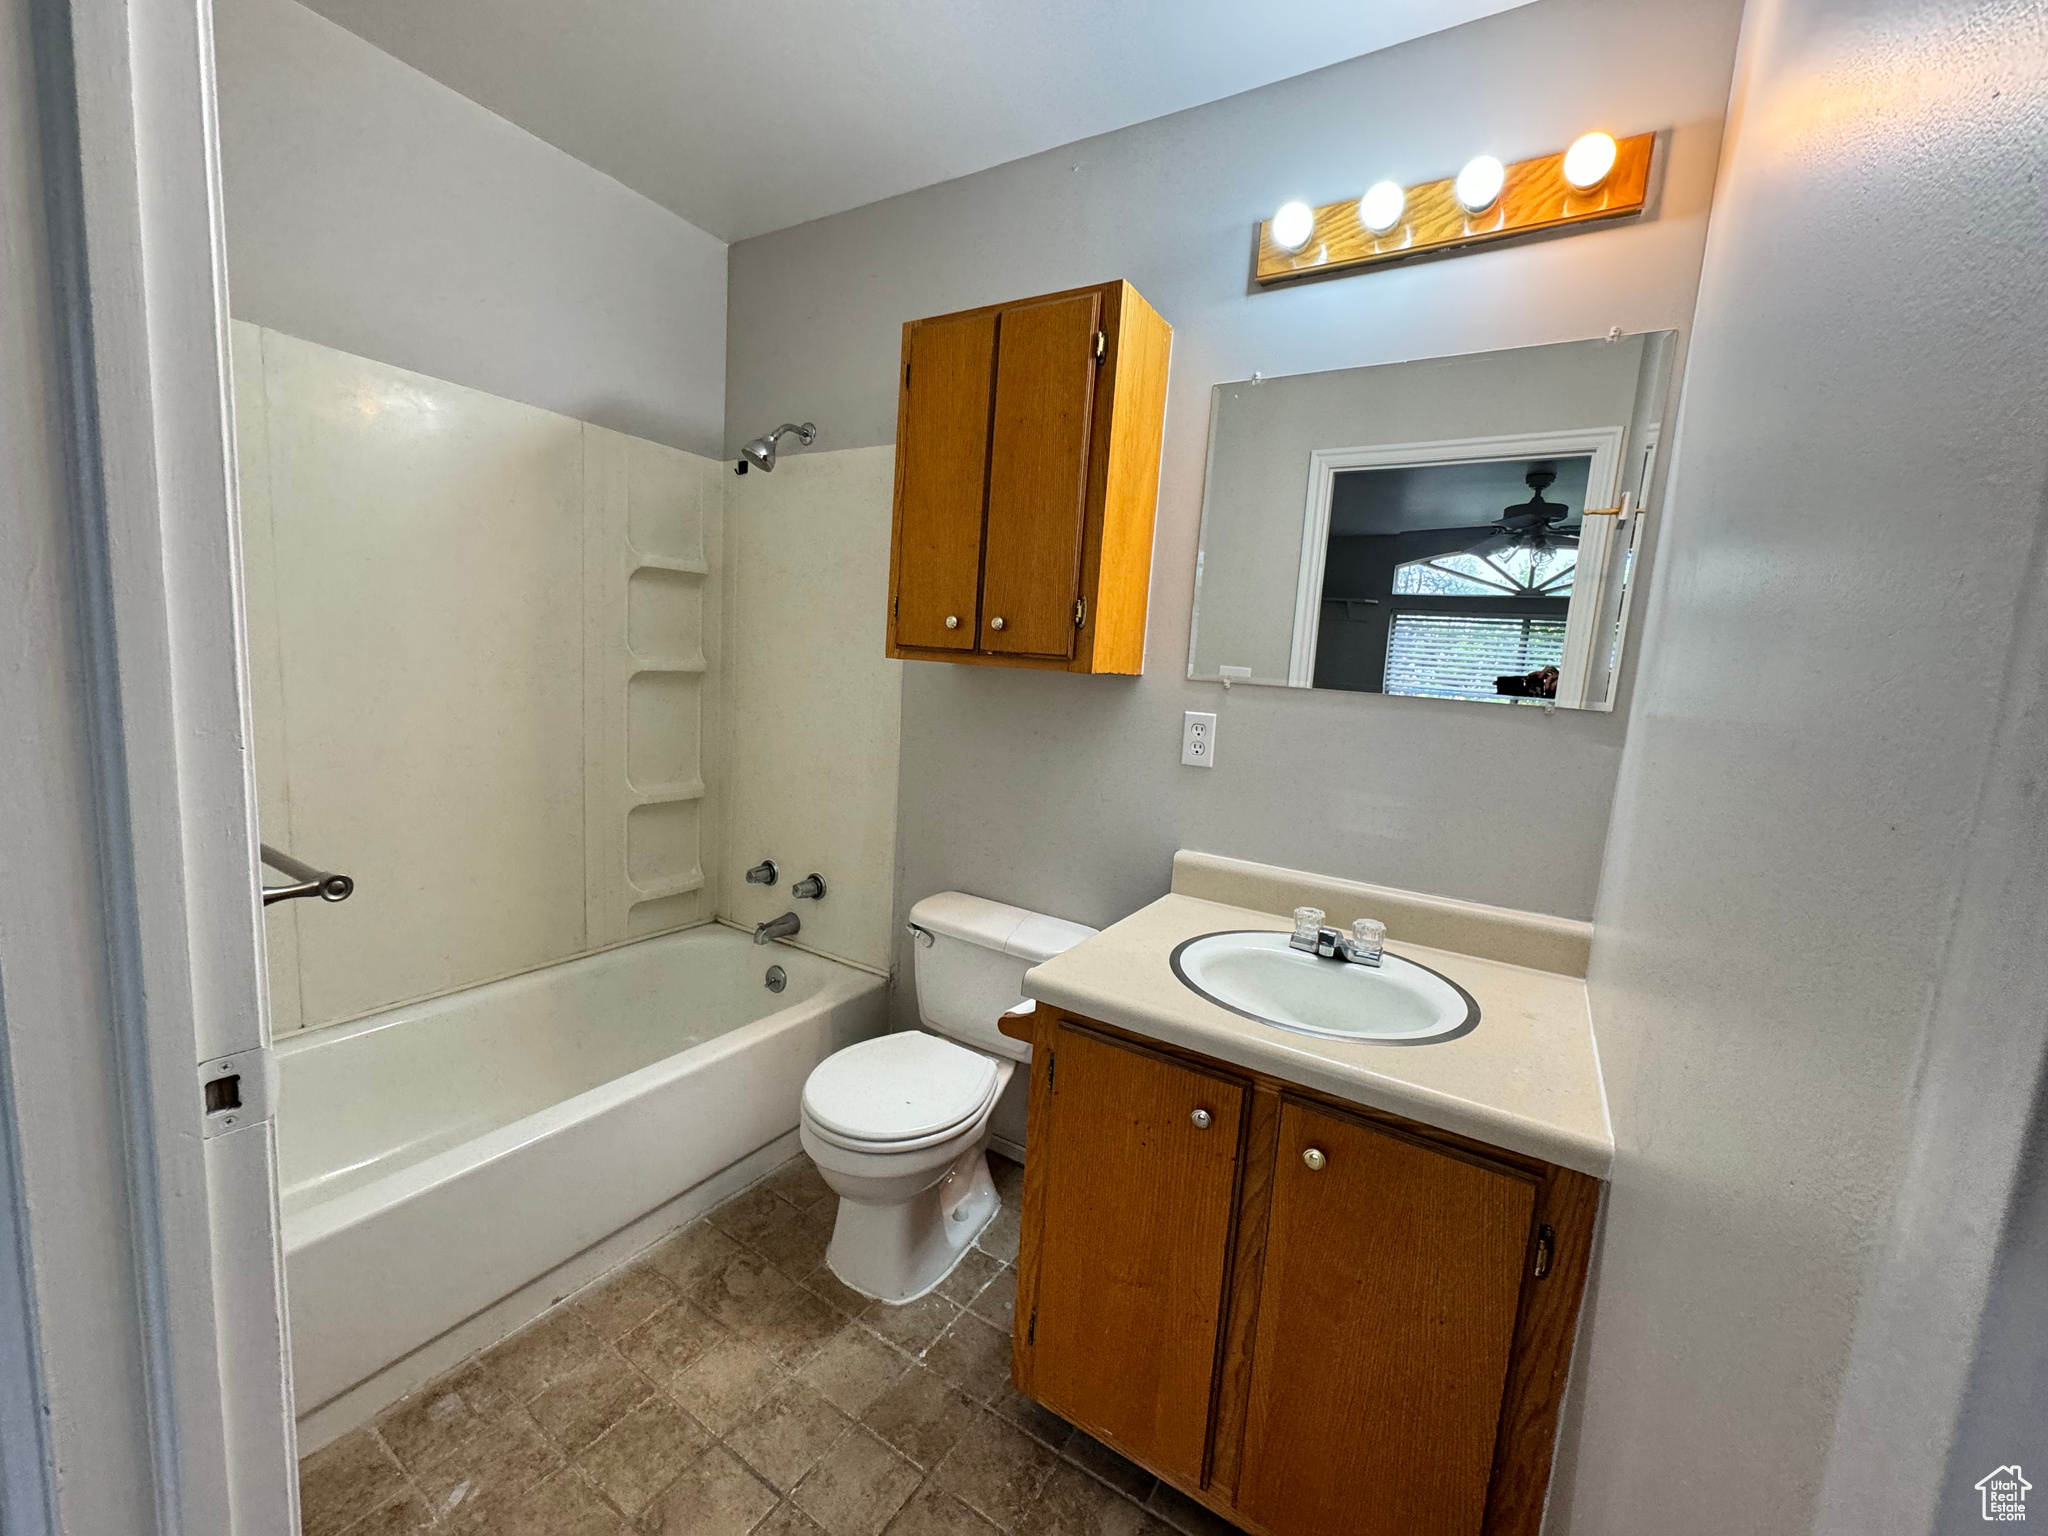 Full bathroom with ceiling fan, toilet, vanity, tub / shower combination, and tile floors